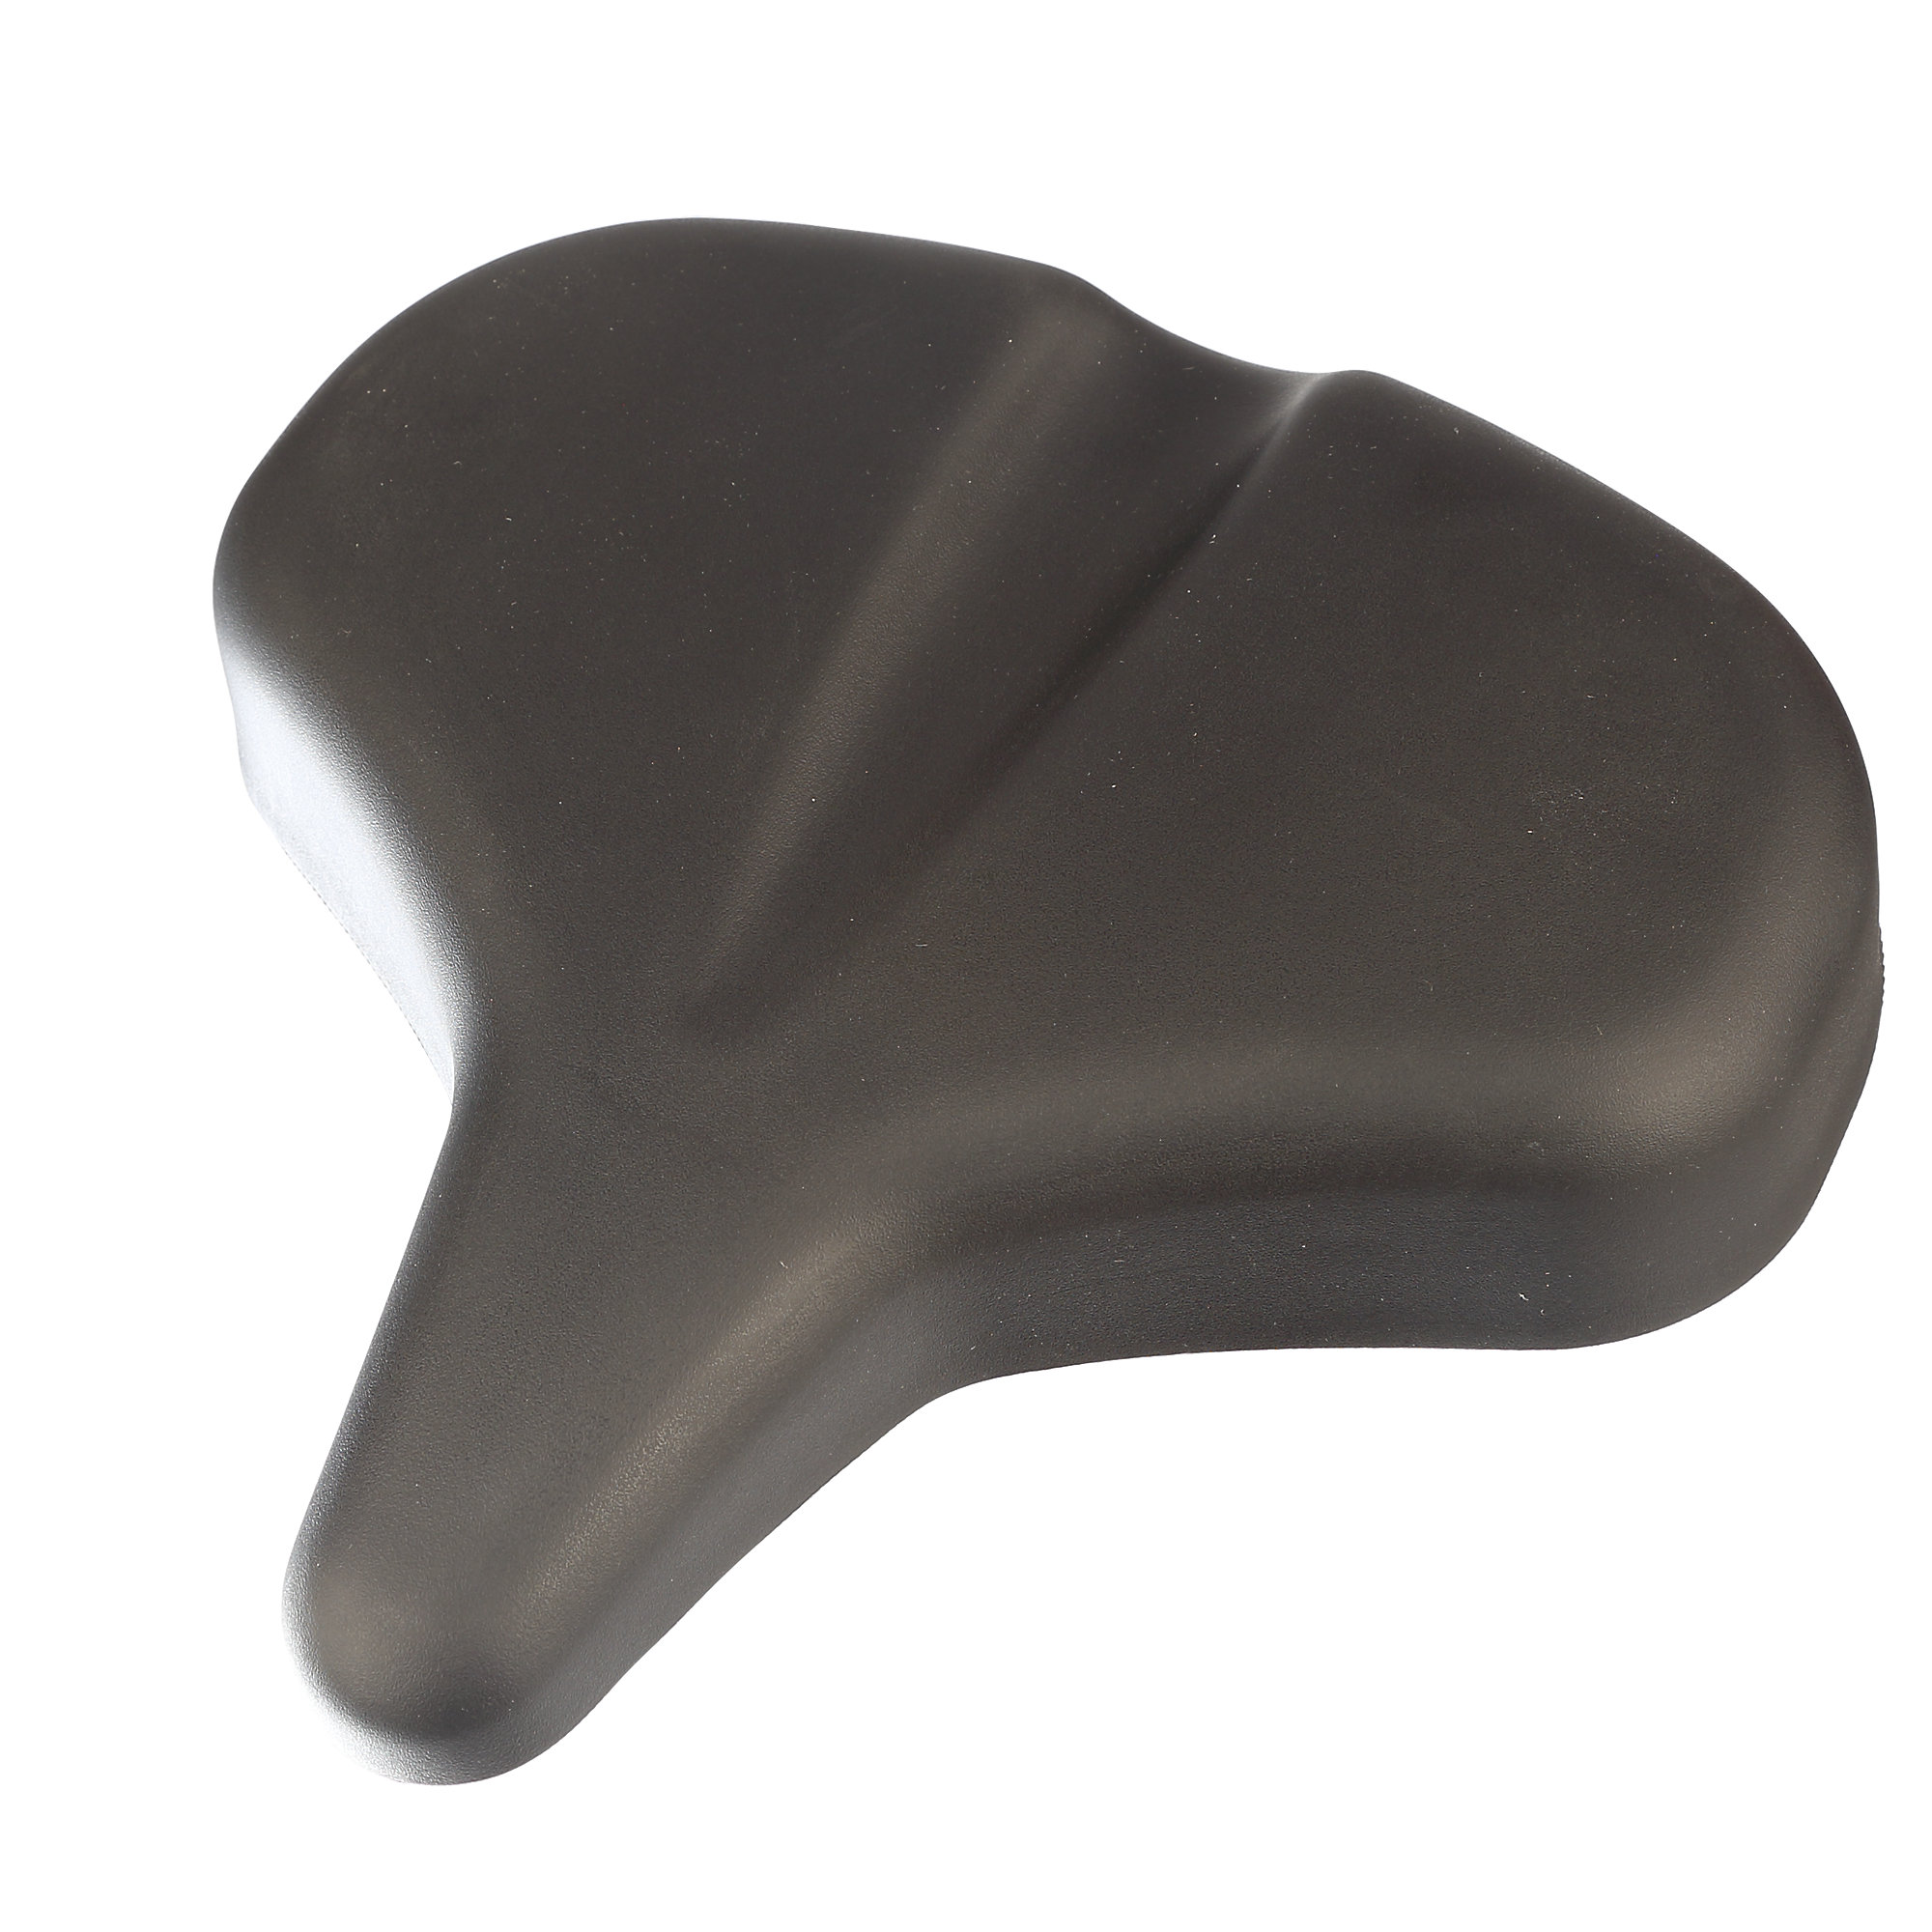 Bike Seat for certain NordicTrack and  Freemotion Upright Model#s